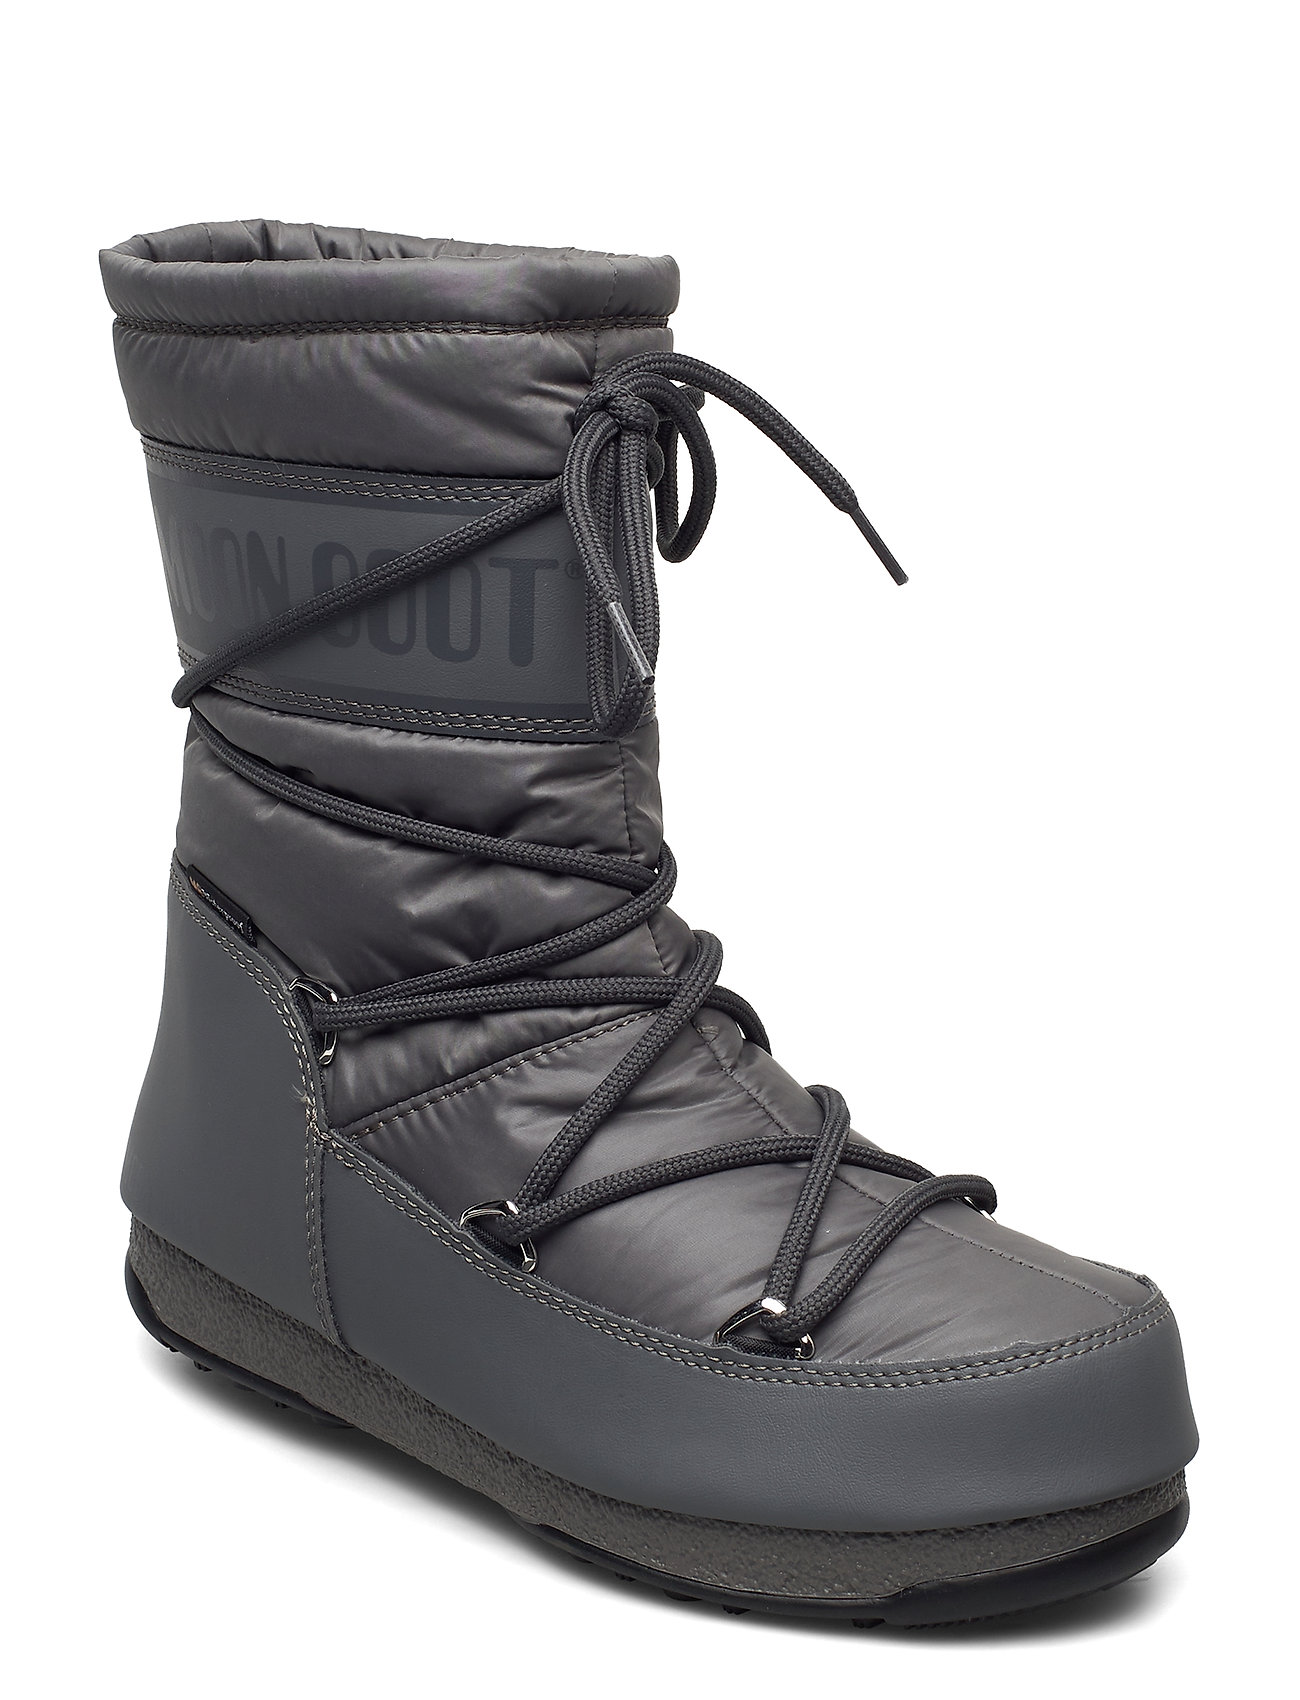 Mb Mid Nylon Wp Shoes Boots Ankle Boots Ankle Boot - Flat Harmaa Moon Boot